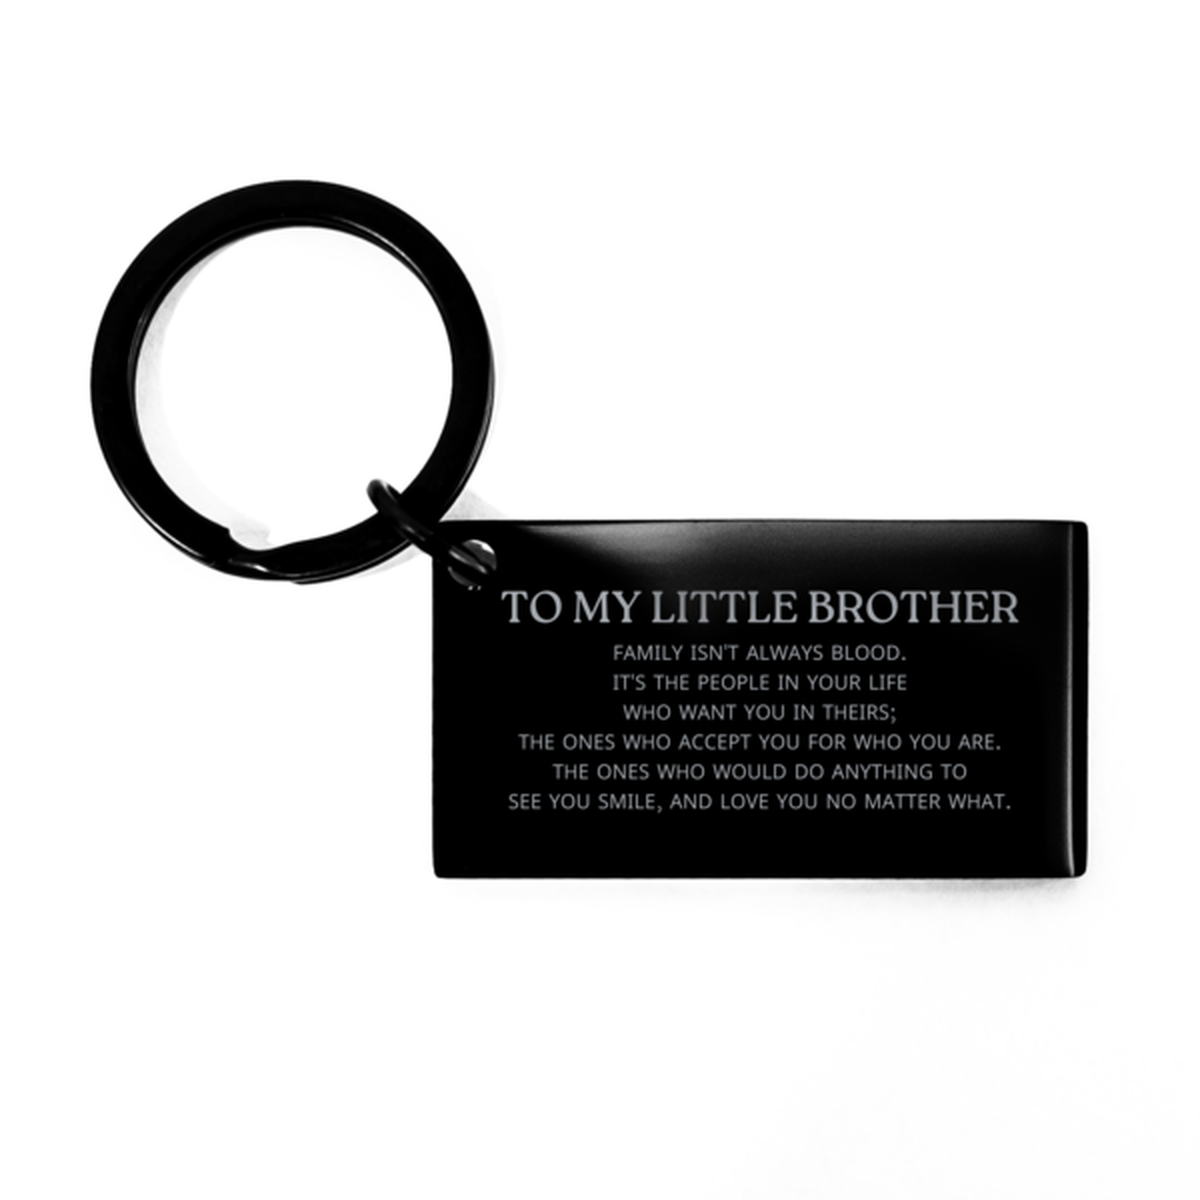 To My Little Brother Gifts, Family isn't always blood, Little Brother Keychain, Birthday Christmas Unique Present For Little Brother